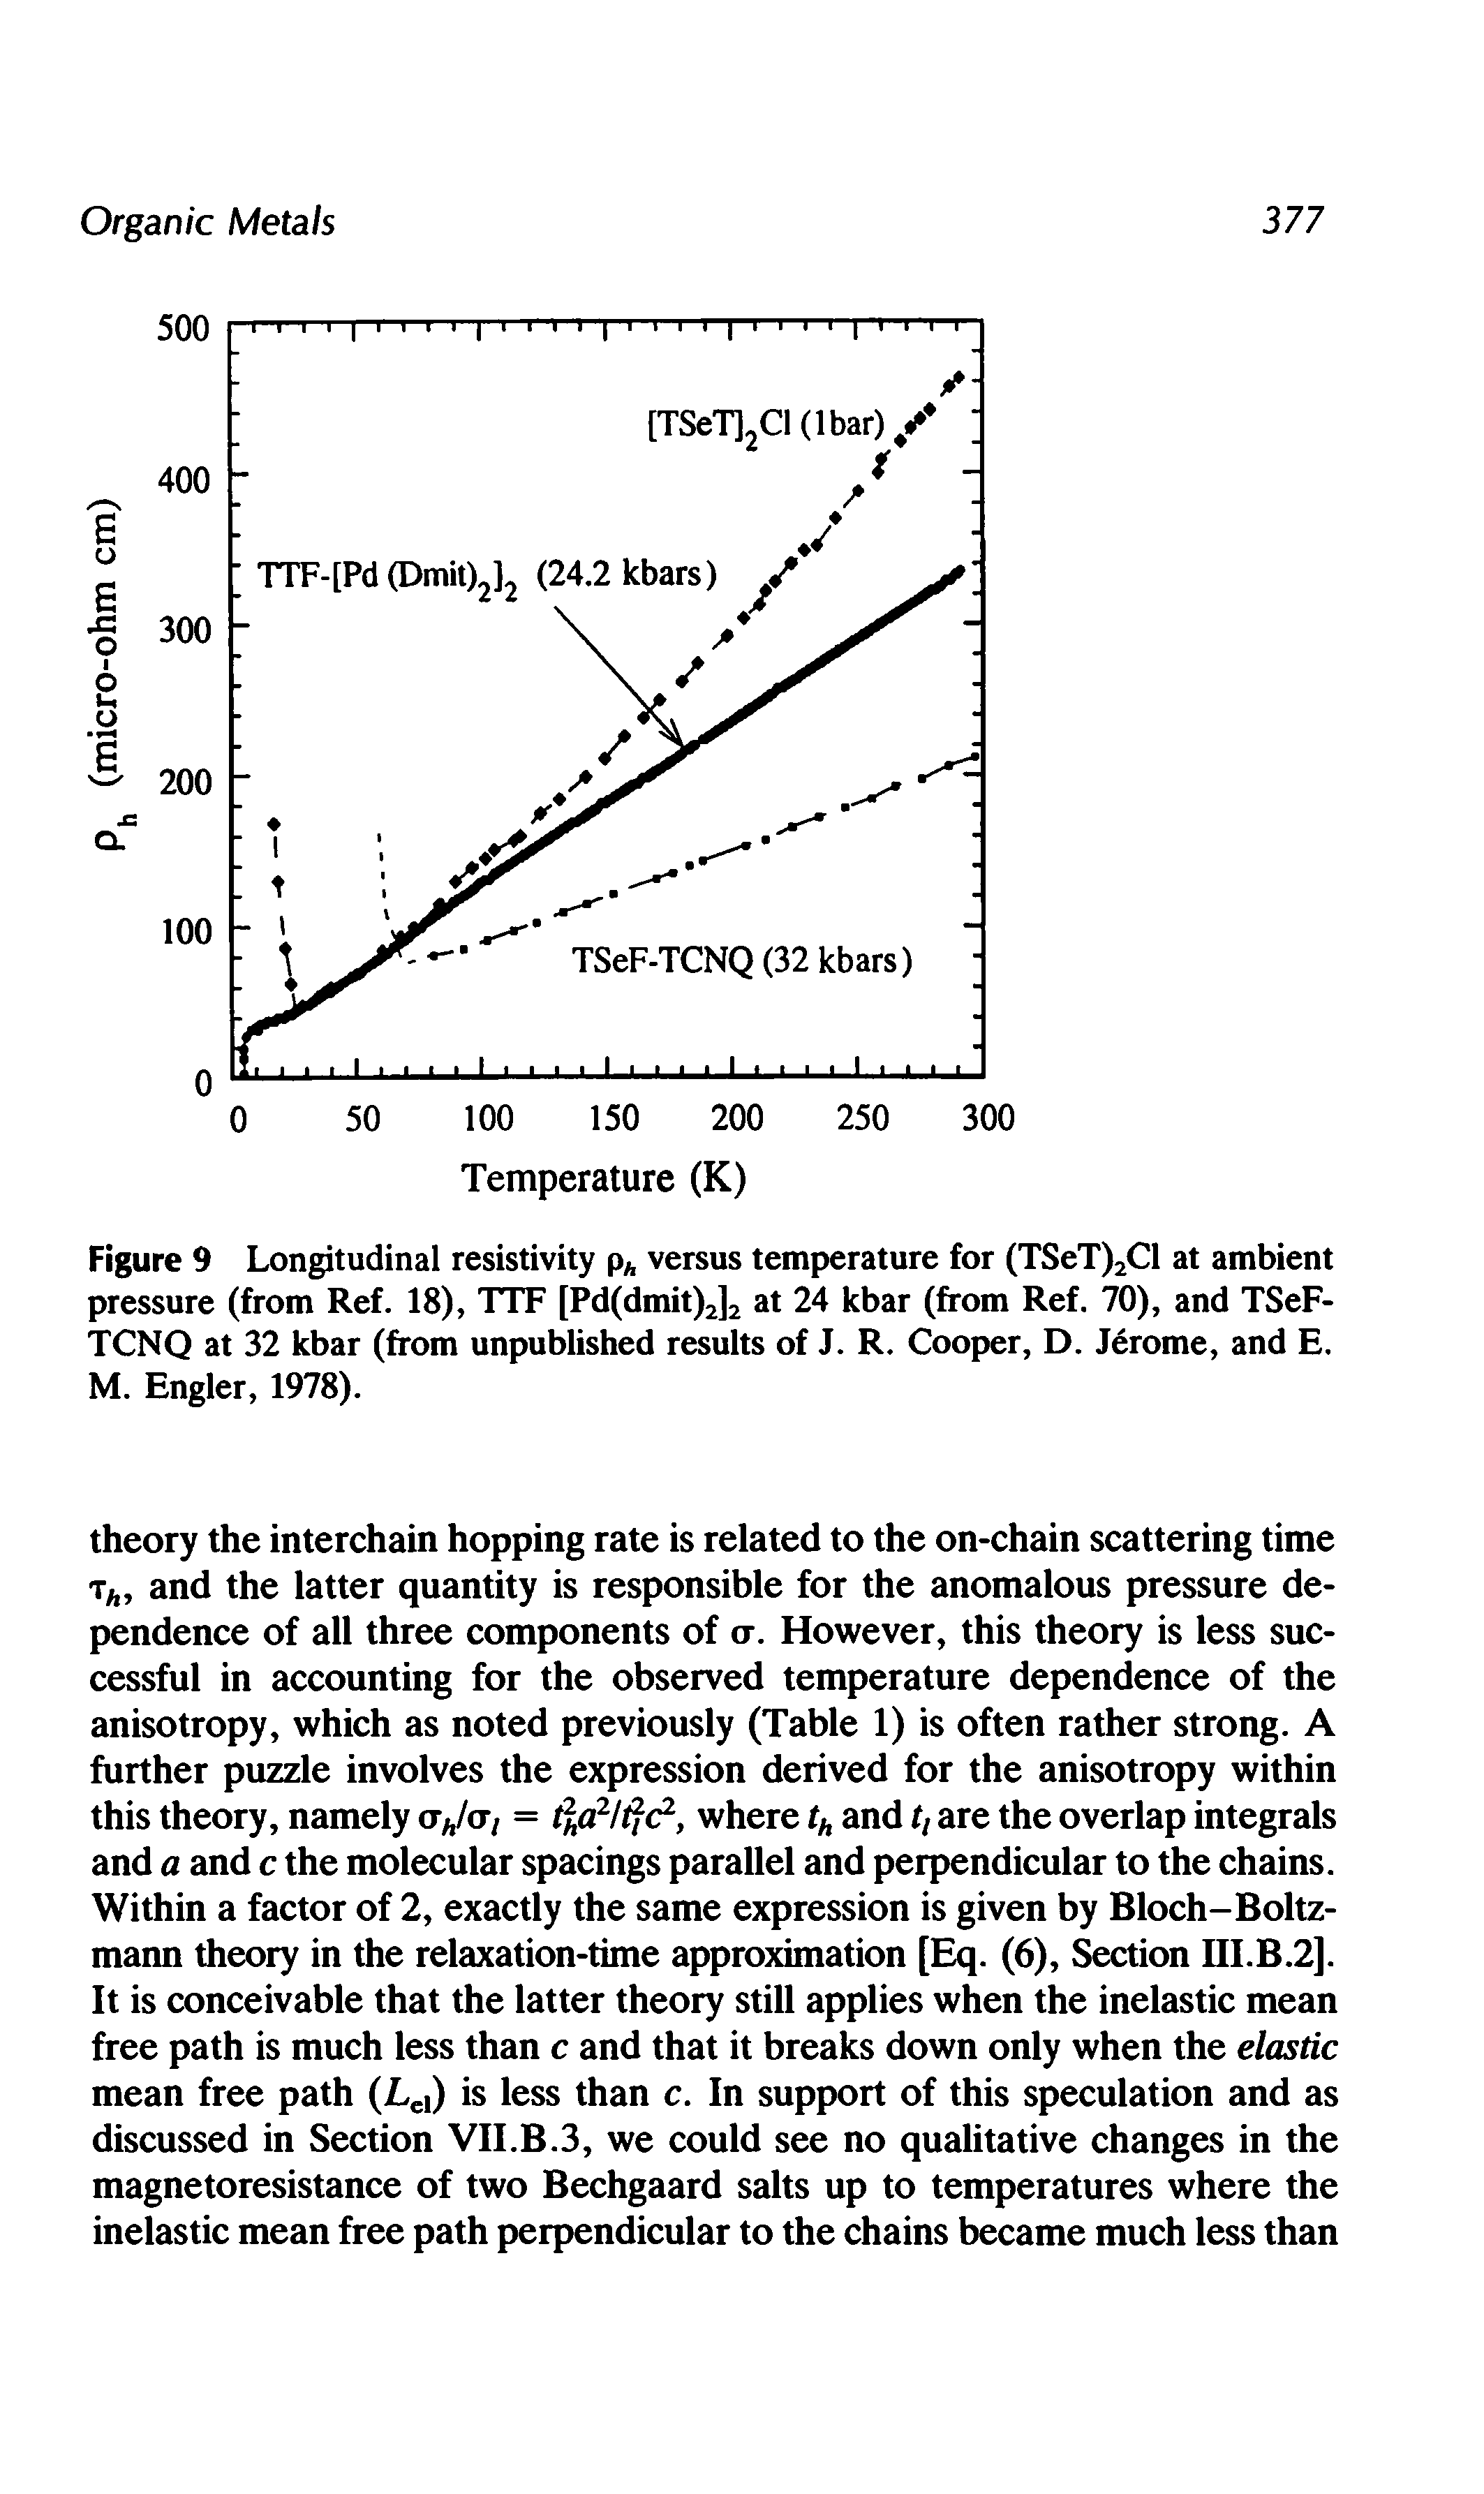 Figure 9 Longitudinal resistivity ph versus temperature for (TSeT)2Cl at ambient pressure (from Ref. 18), TTF [Pd(dmit)2]2 at 24 kbar (from Ref. 70), and TSeF-TCNQ at 32 kbar (from unpublished results of J. R. Cooper, D. Jerome, and E. M. Engler, 1978).